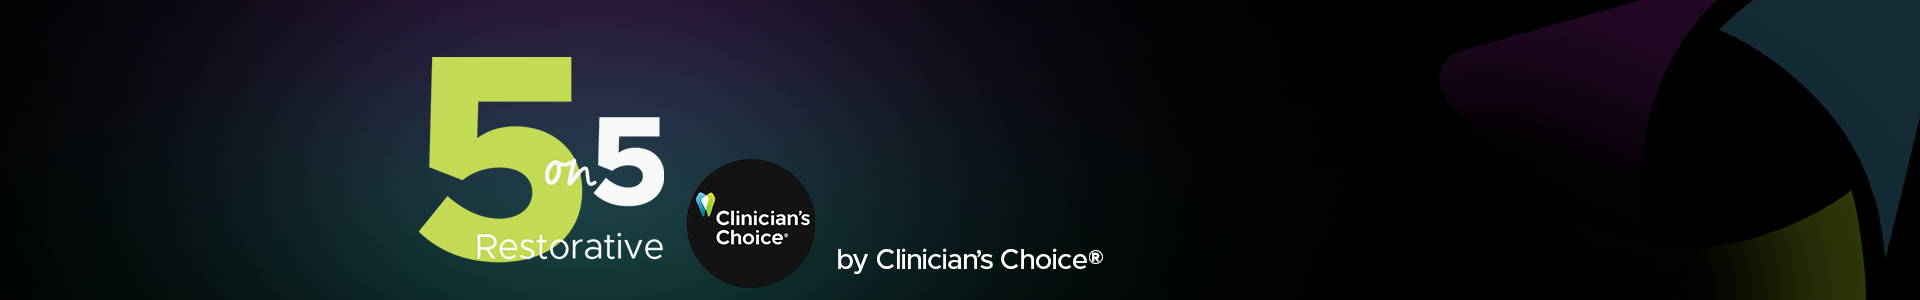 blog banner with 5 on 5 restorative logo and Clinician's Choice logo